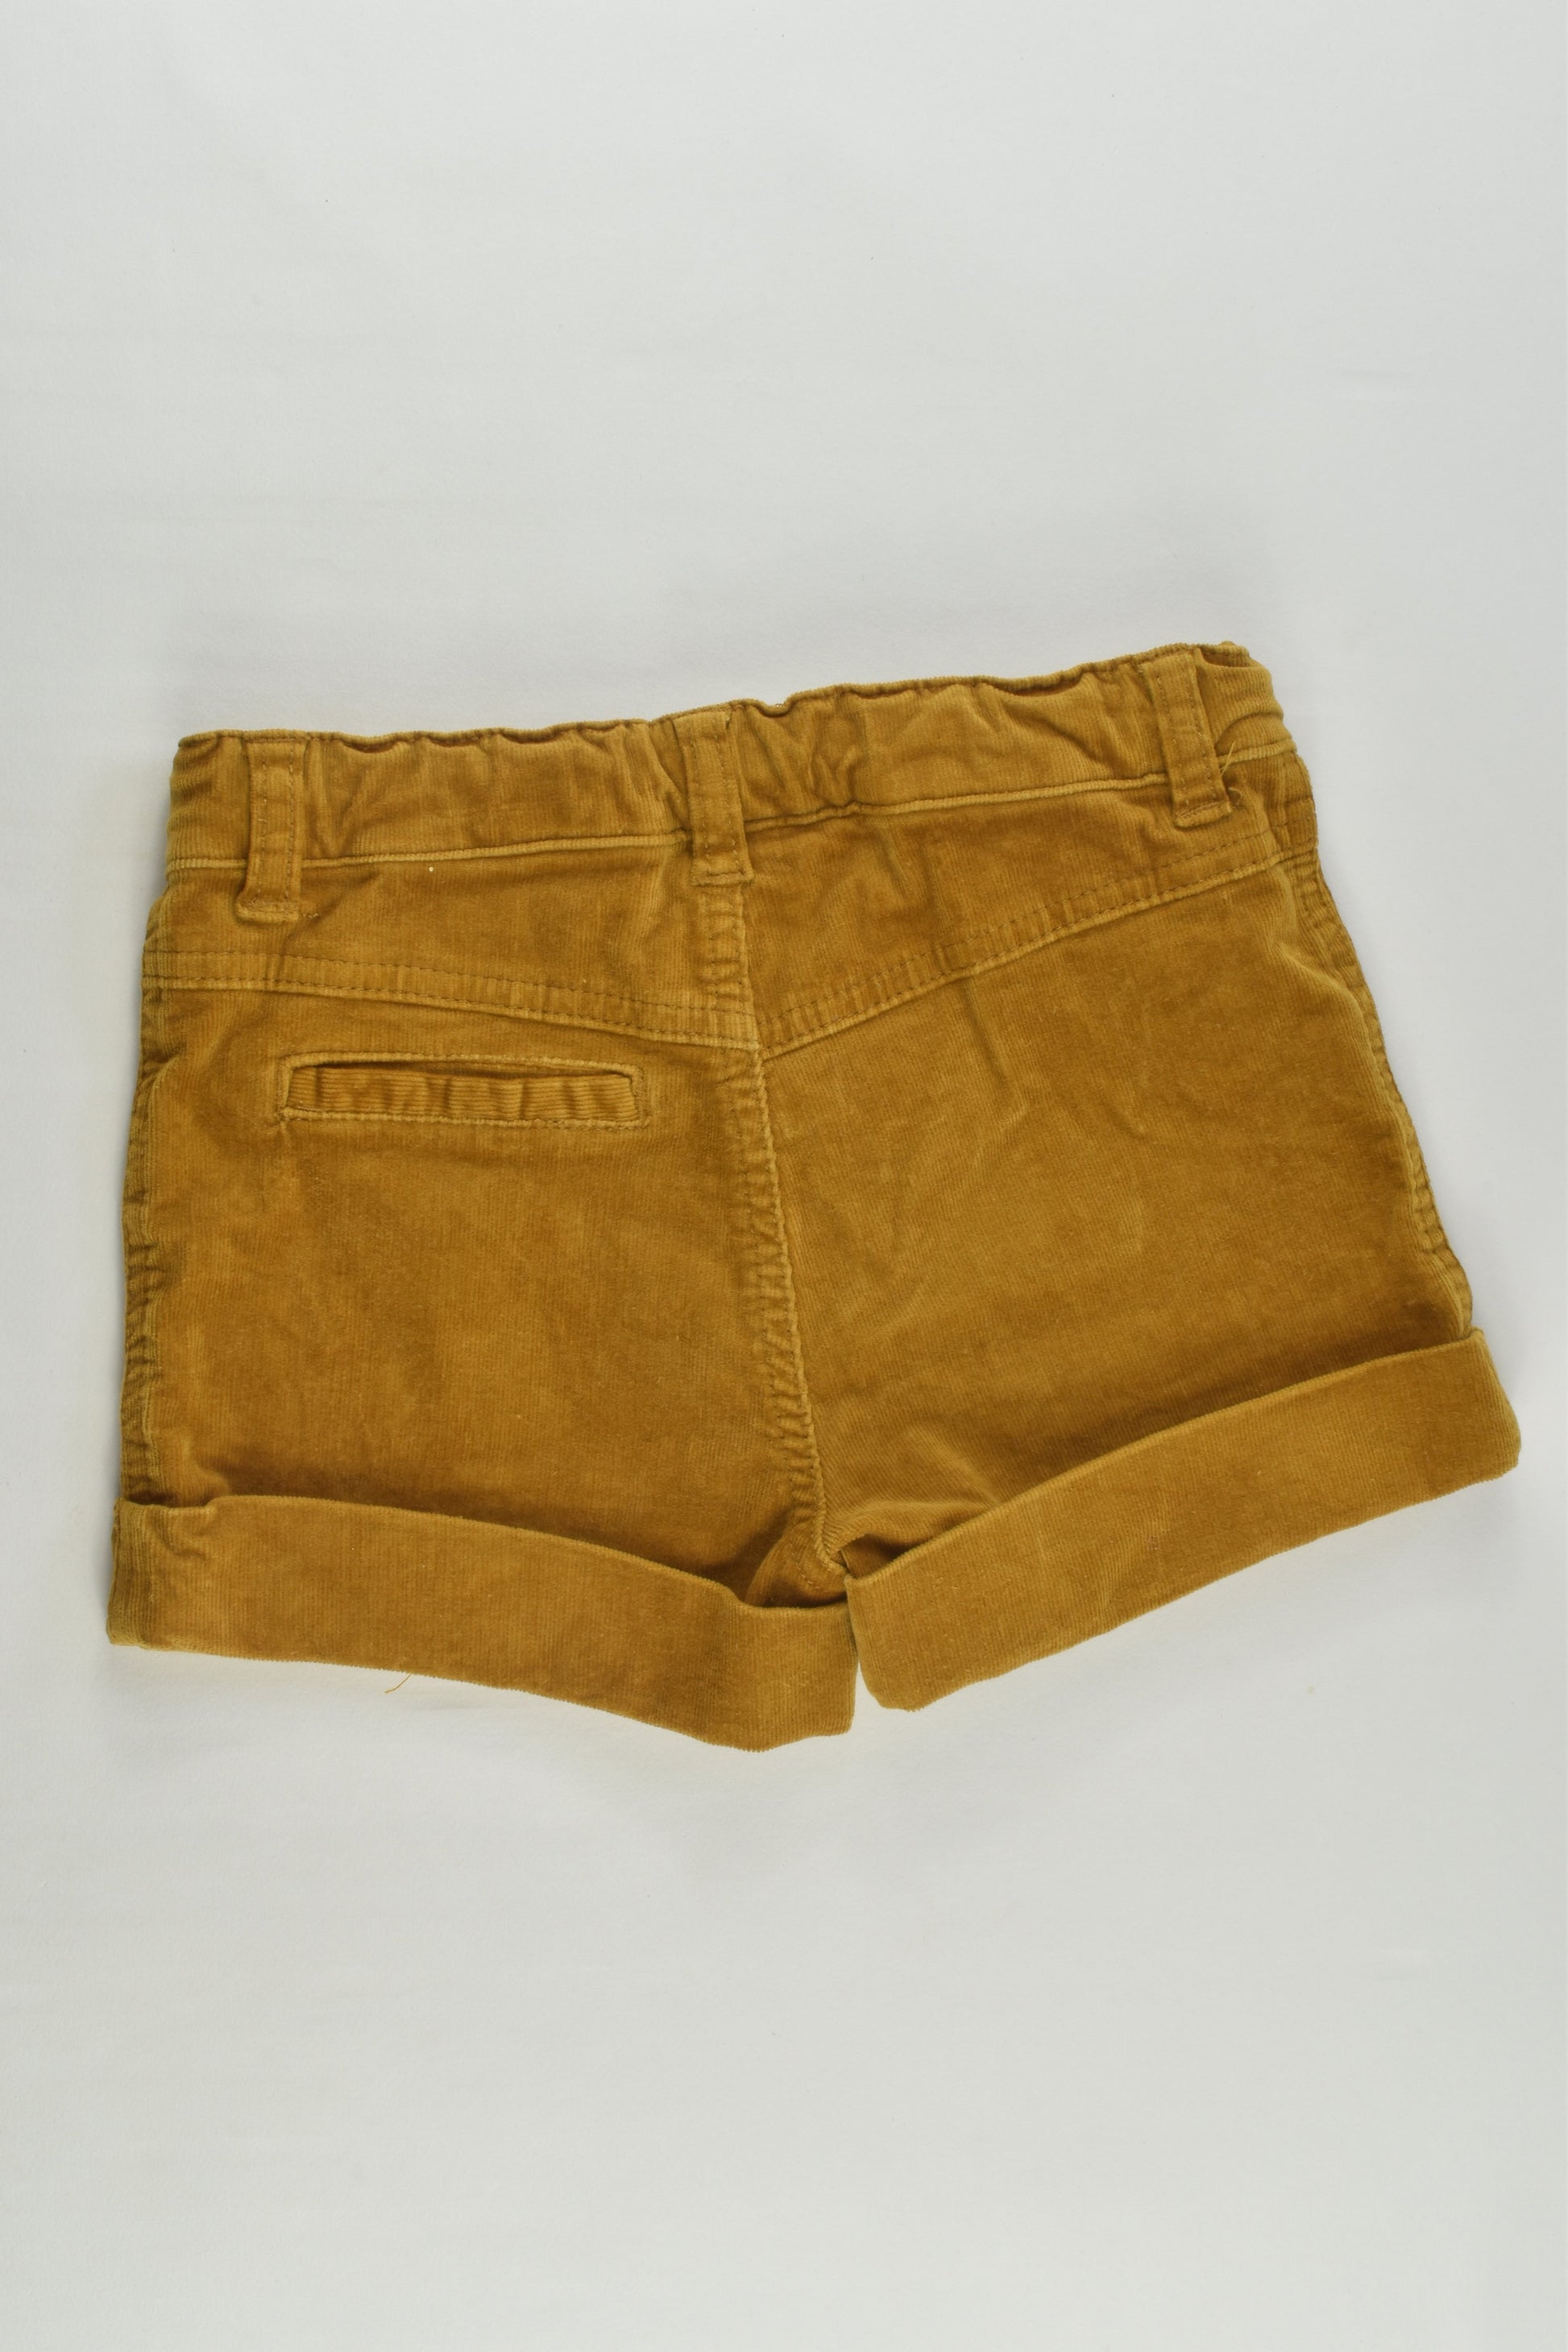 Breakers Size 5 Stretchy Cord Shorts